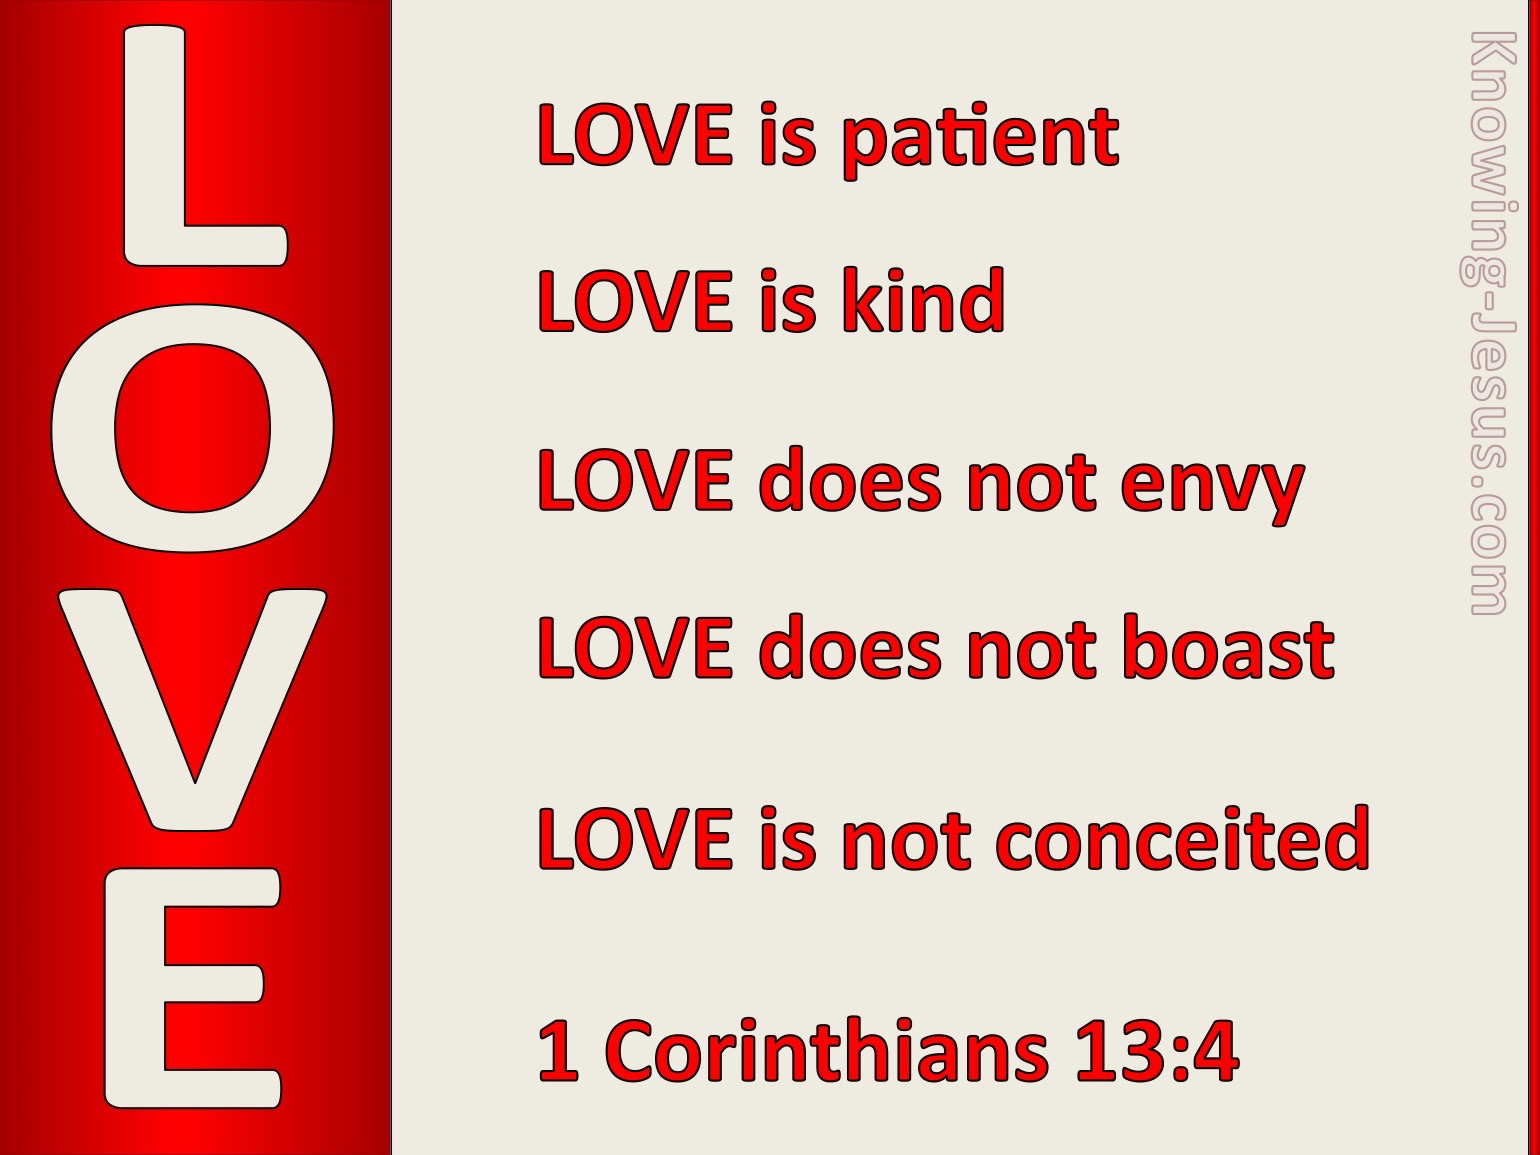 love-is-patient-love-is-kind-verse-by-verse-analysis